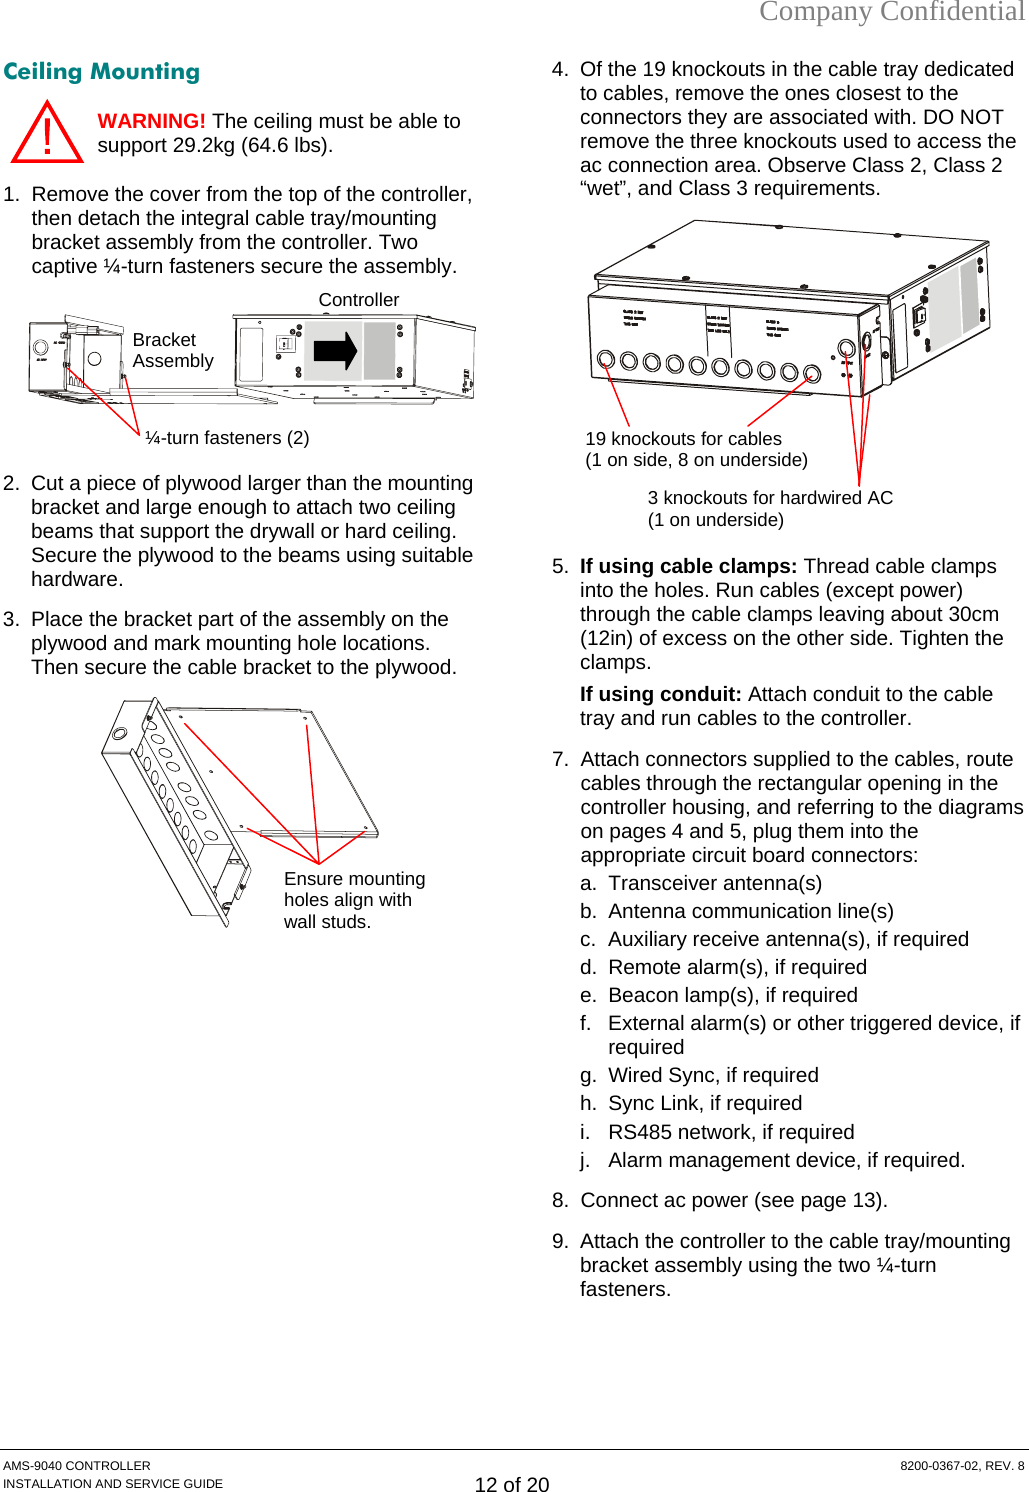 Company Confidential Ceiling Mounting MS-9040 CONTROLLER  8200-0367-02, REV. 8 INSTALLATION AND SERVICE GUIDE 12 of 20 WARNING! The ceiling must be able to support 29.2kg (64.6 lbs).  1.  Remove the cover from the top of the controller, then detach the integral cable tray/mounting bracket assembly from the controller. Two captive ¼-turn fasteners secure the assembly.   2.  Cut a piece of plywood larger than the mounting bracket and large enough to attach two ceiling beams that support the drywall or hard ceiling. Secure the plywood to the beams using suitable hardware. 3.  Place the bracket part of the assembly on the plywood and mark mounting hole locations. Then secure the cable bracket to the plywood.   4.  Of the 19 knockouts in the cable tray dedicated to cables, remove the ones closest to the connectors they are associated with. DO NOT remove the three knockouts used to access the ac connection area. Observe Class 2, Class 2 “wet”, and Class 3 requirements.   Controller     5.  If using cable clamps: Thread cable clamps into the holes. Run cables (except power) through the cable clamps leaving about 30cm (12in) of excess on the other side. Tighten the clamps. If using conduit: Attach conduit to the cable tray and run cables to the controller. 7.  Attach connectors supplied to the cables, route cables through the rectangular opening in the controller housing, and referring to the diagrams on pages 4 and 5, plug them into the appropriate circuit board connectors: a. Transceiver antenna(s) b.  Antenna communication line(s) c. Auxiliary receive antenna(s), if required d.  Remote alarm(s), if required e.  Beacon lamp(s), if required f.  External alarm(s) or other triggered device, if required g.  Wired Sync, if required h.  Sync Link, if required i.  RS485 network, if required j.  Alarm management device, if required. 8.  Connect ac power (see page 13). 9.  Attach the controller to the cable tray/mounting bracket assembly using the two ¼-turn fasteners.   Ensure mounting holes align with wall studs. 3 knockouts for hardwired AC (1 on underside) 19 knockouts for cables (1 on side, 8 on underside) Bracket Assembly ¼-turn fasteners (2) A